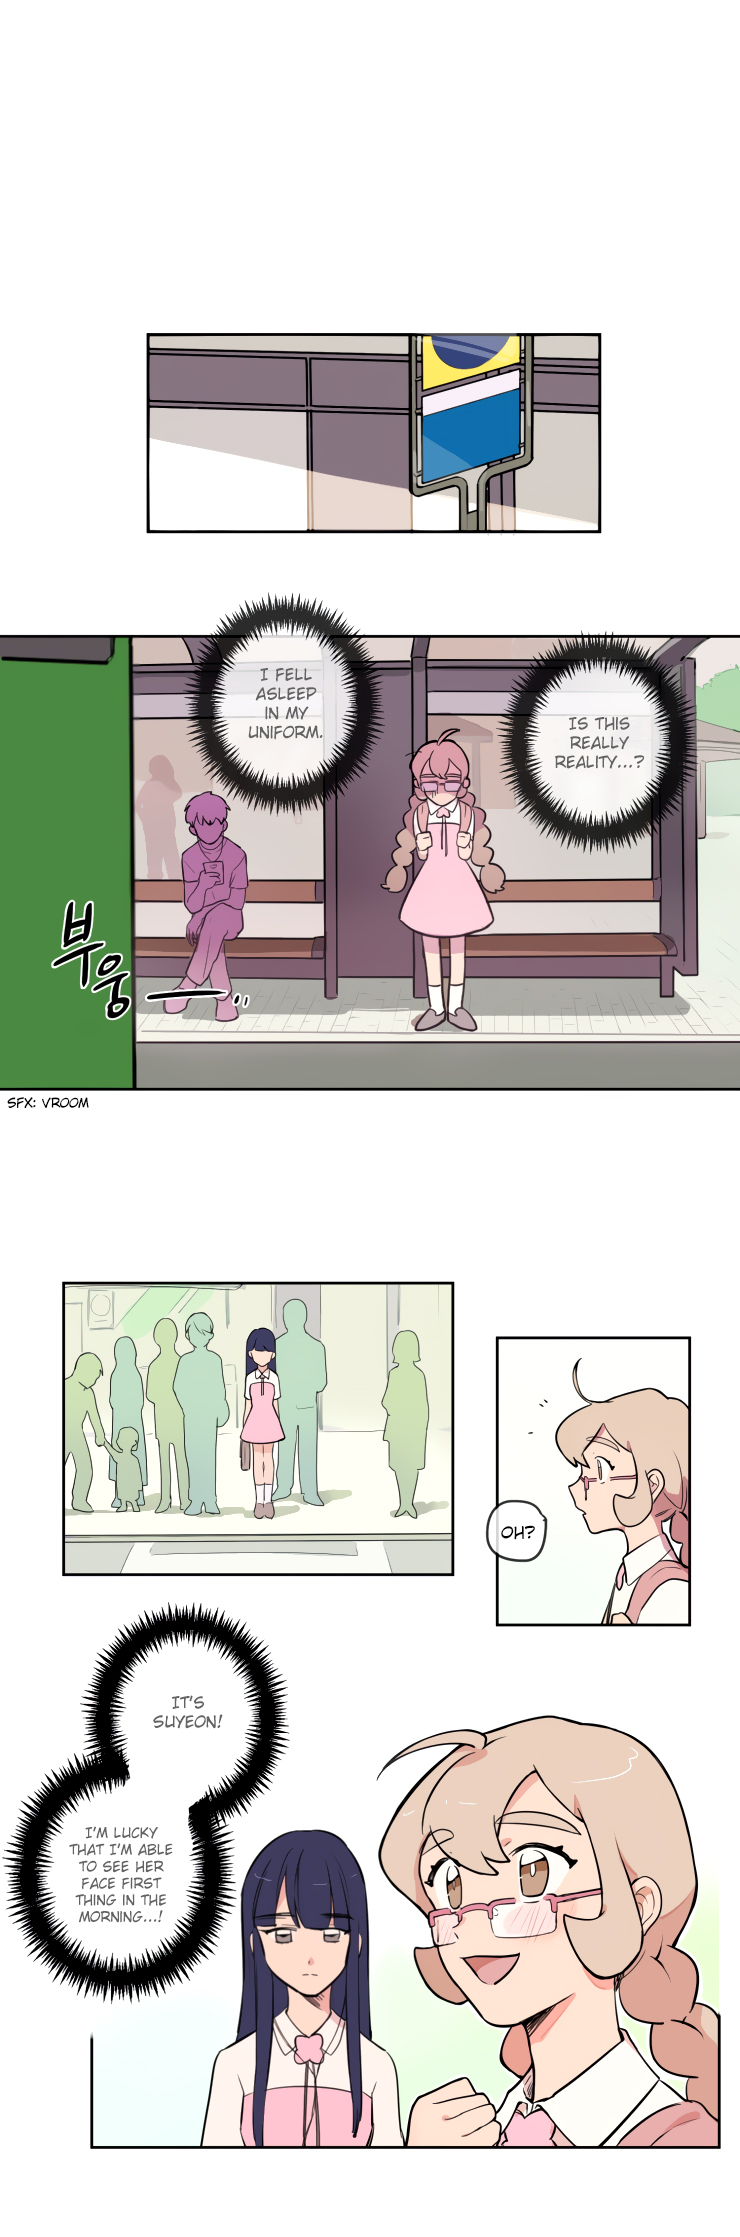 Dance Of The Sugar Plum Fairy - Page 2